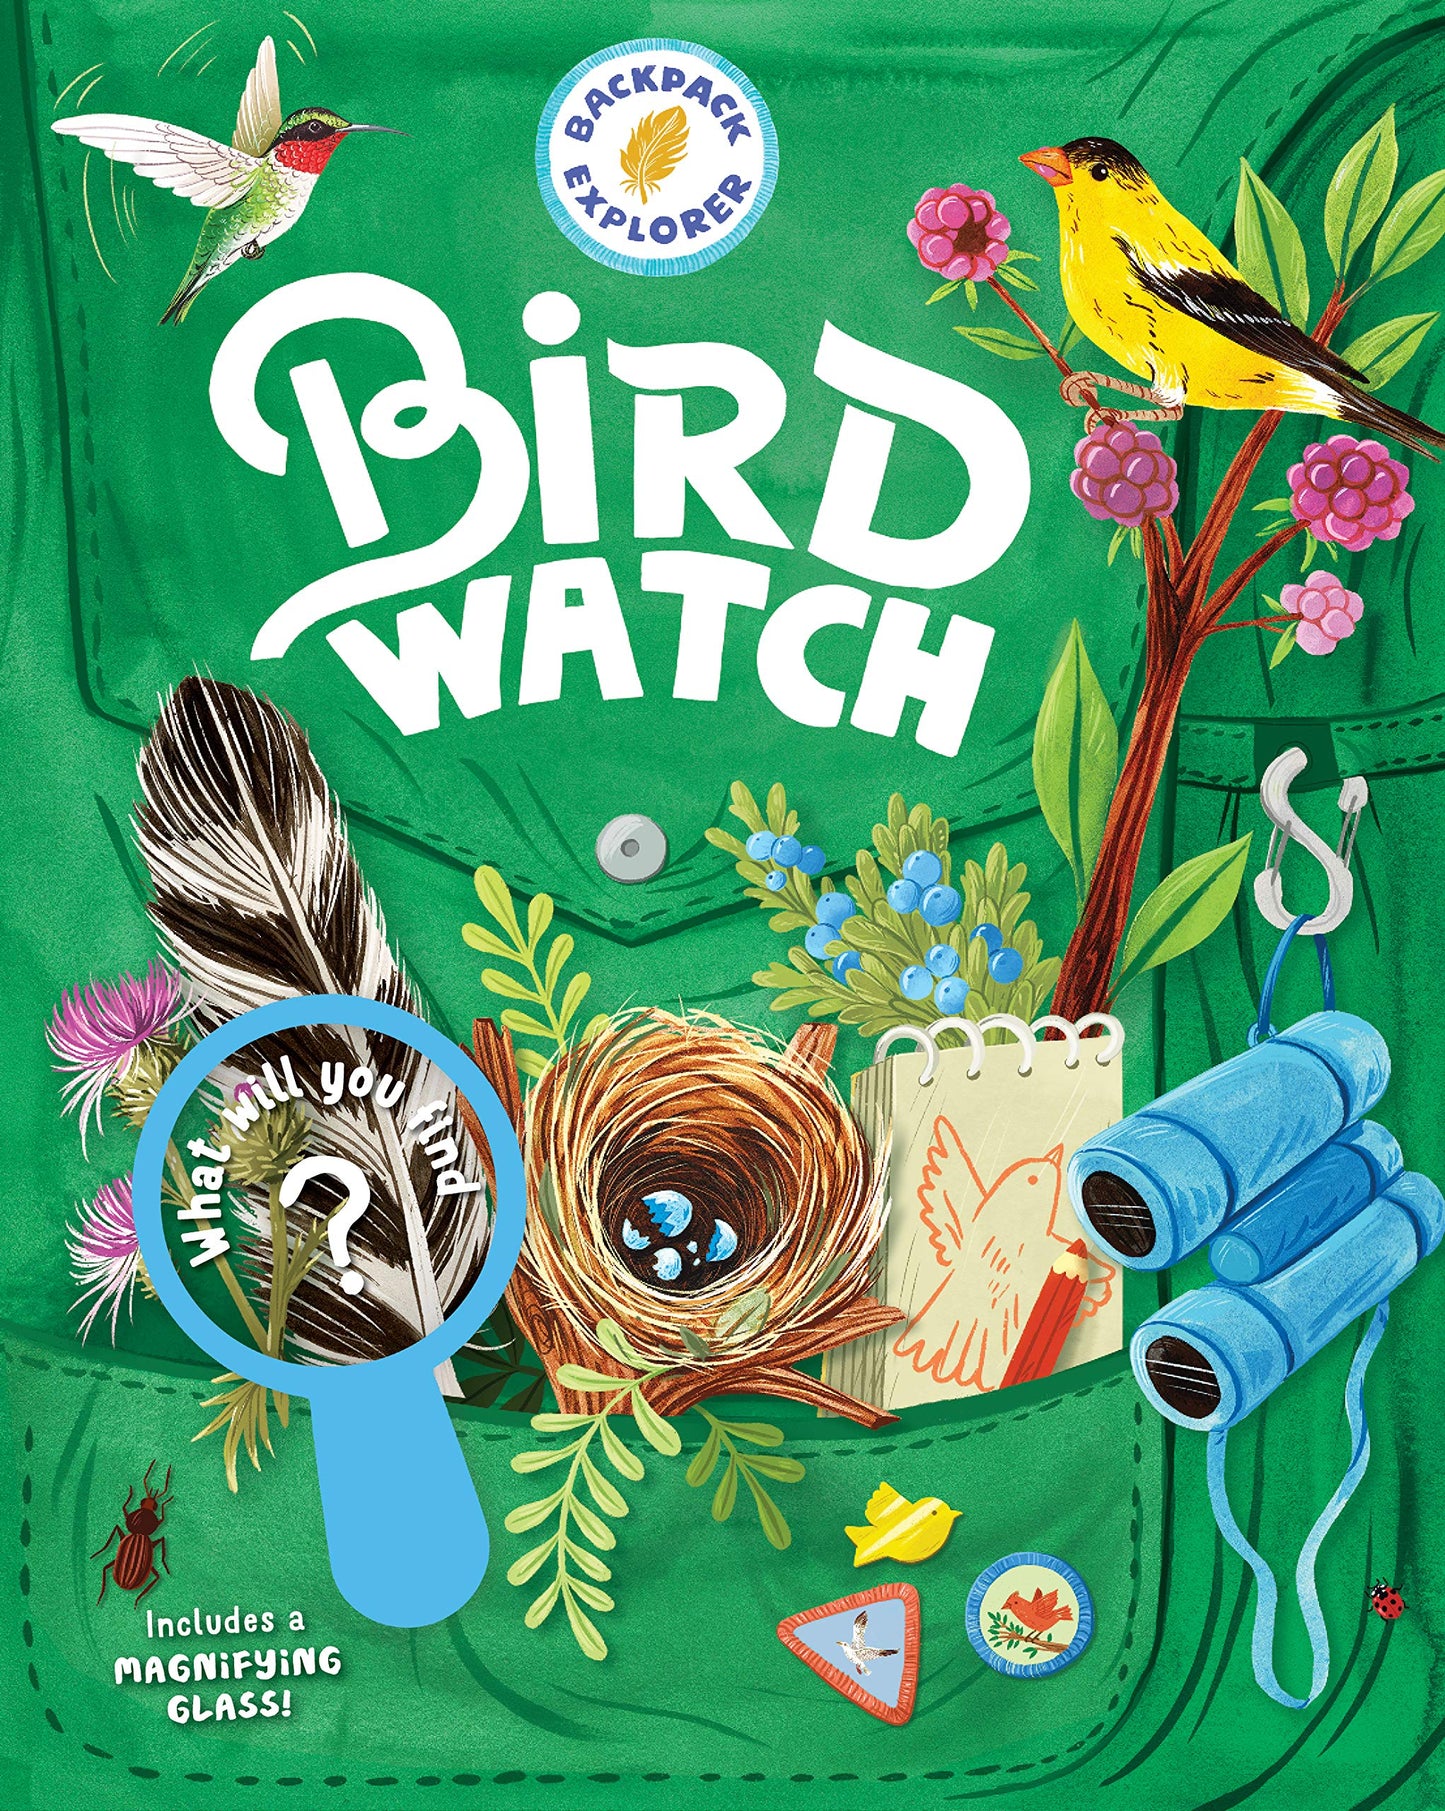 front cover of book has illustration of a green backpack with binoculars, leaves, bird nest, feathers, and title in white